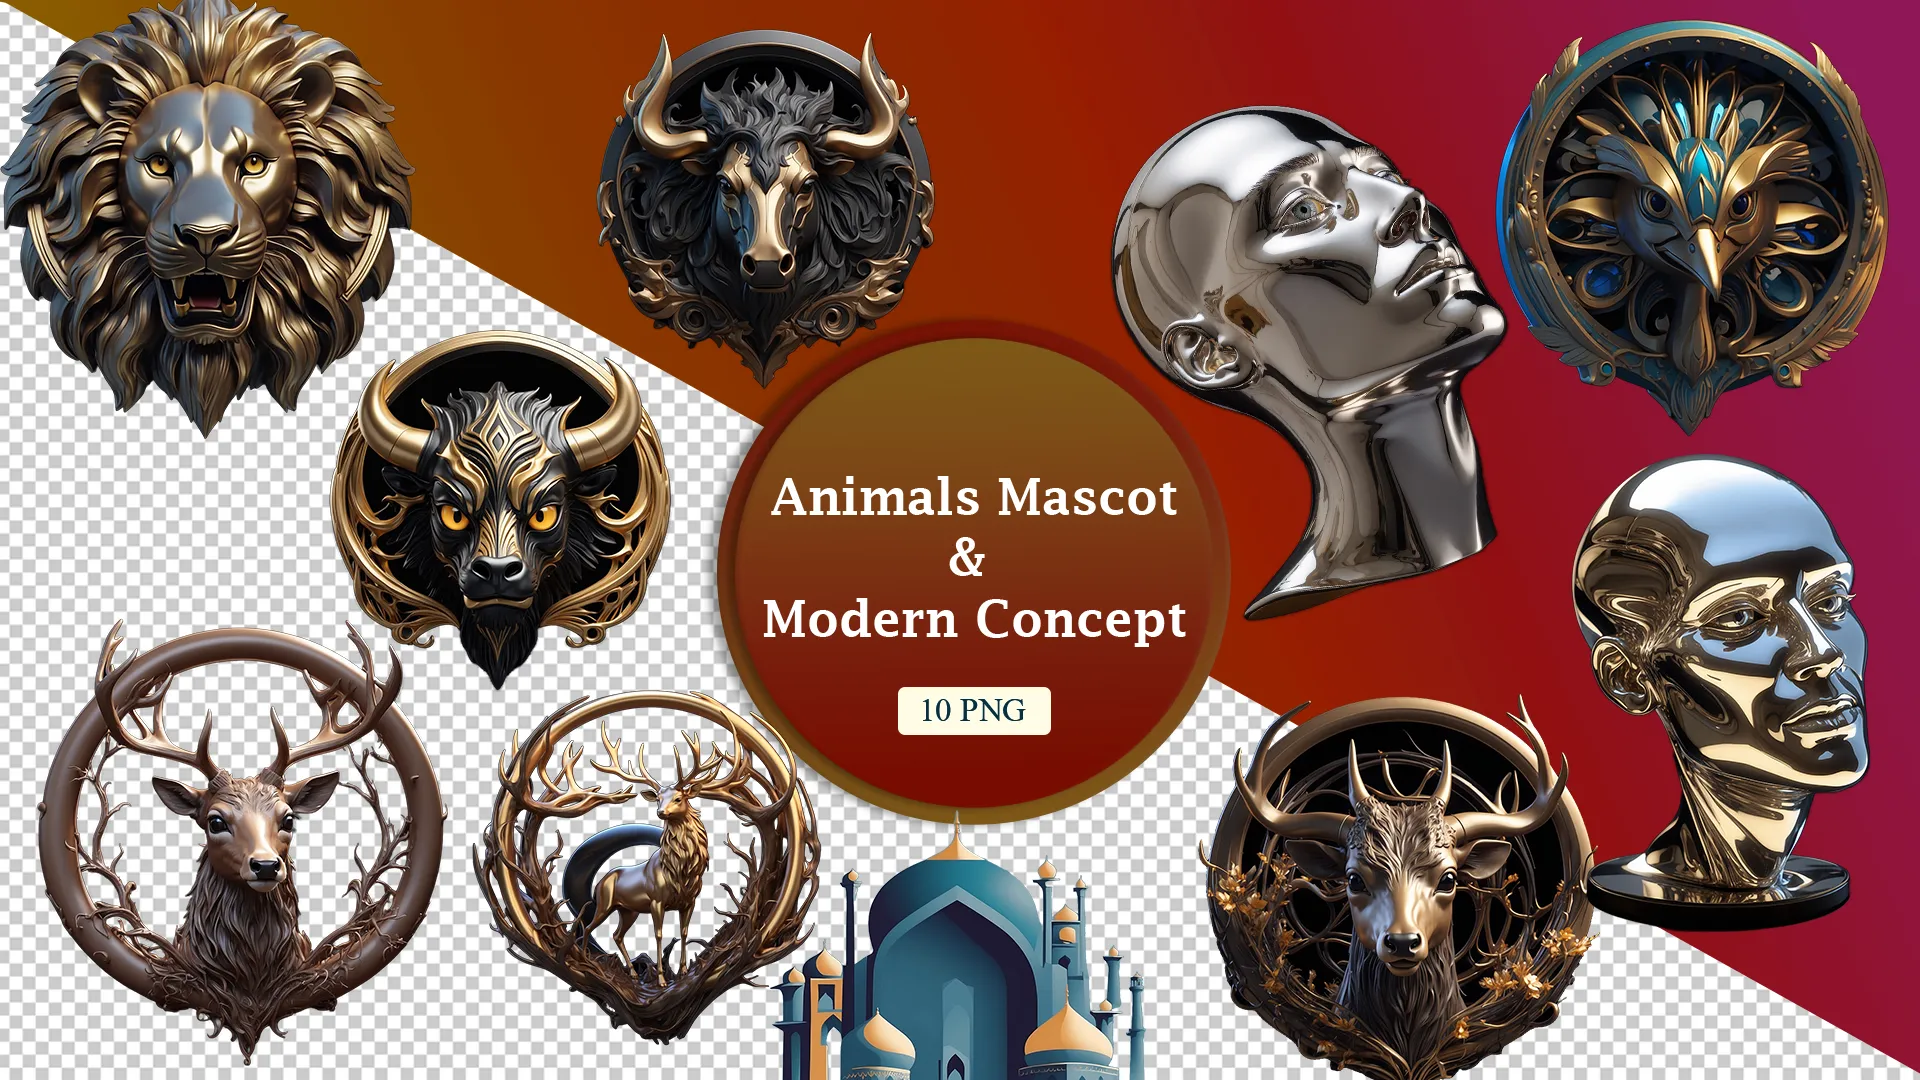 Royal Beasts and Modern Sculptures 3D Collection